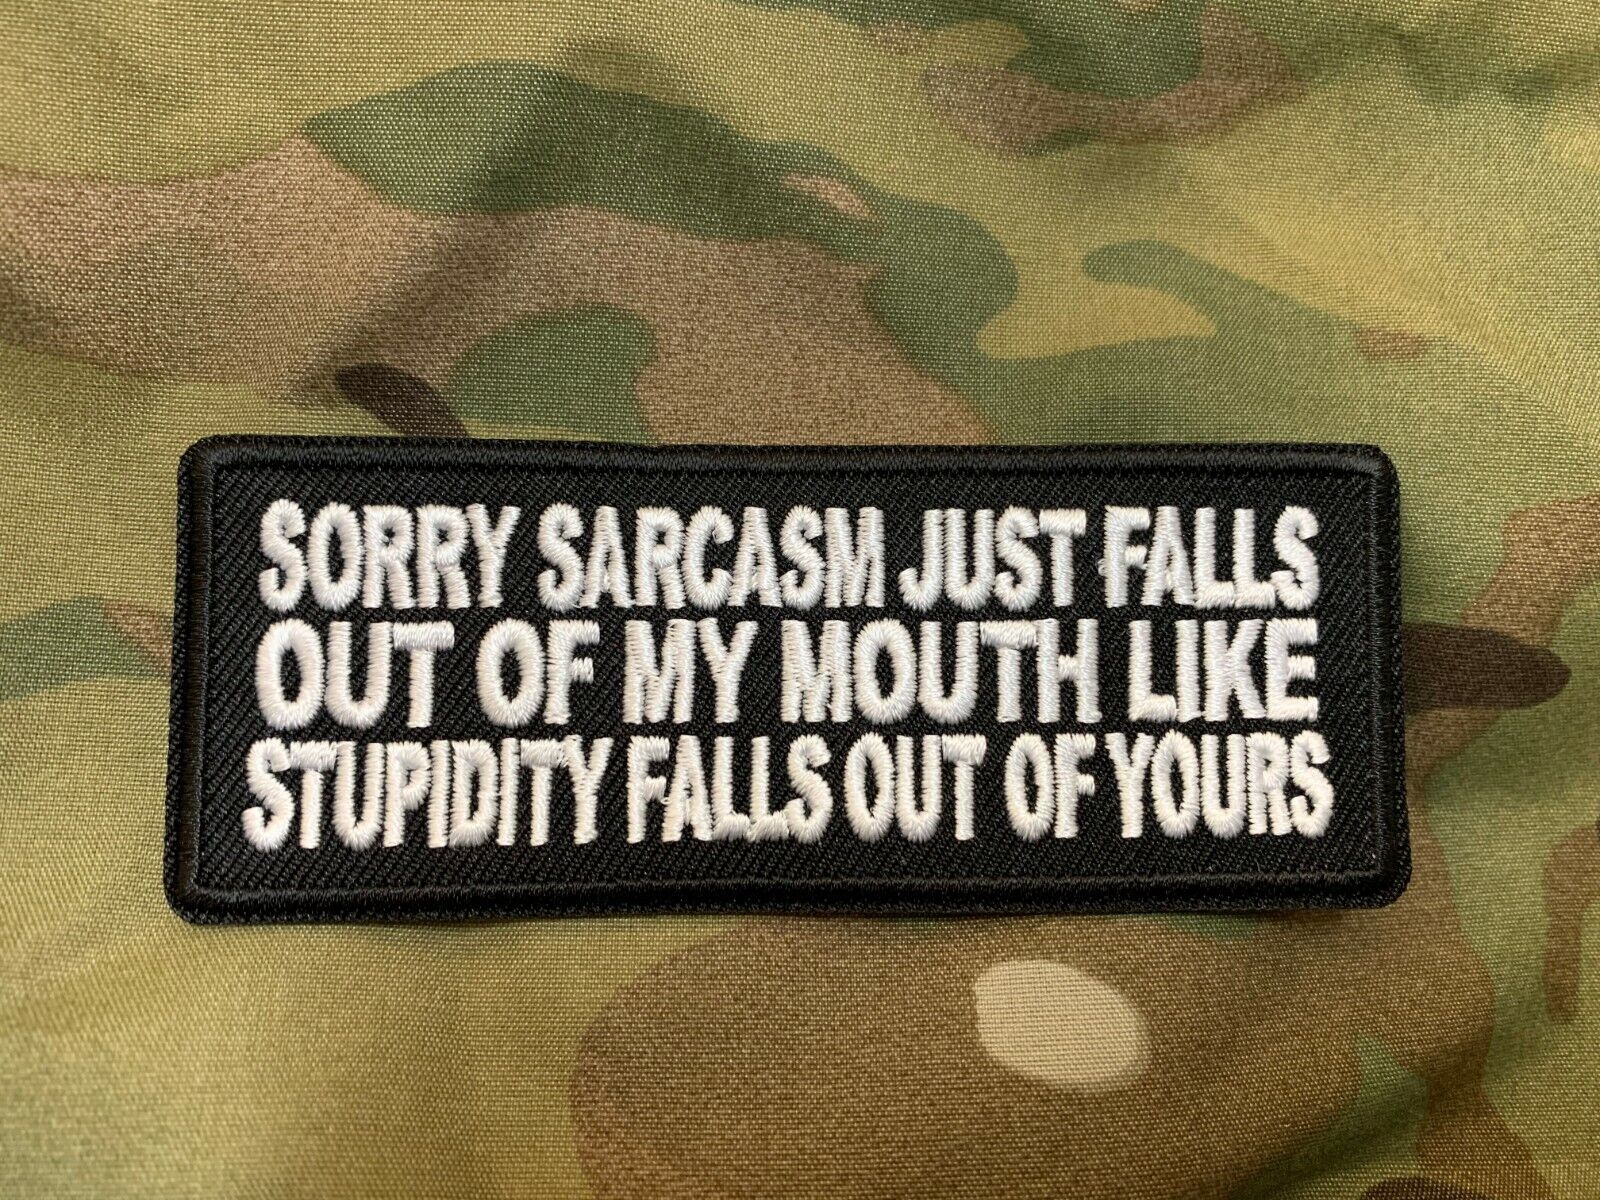 Sorry Sarcasm Just Falls Out of My Mouth Like Stupidity Falls Out of Yours Patch